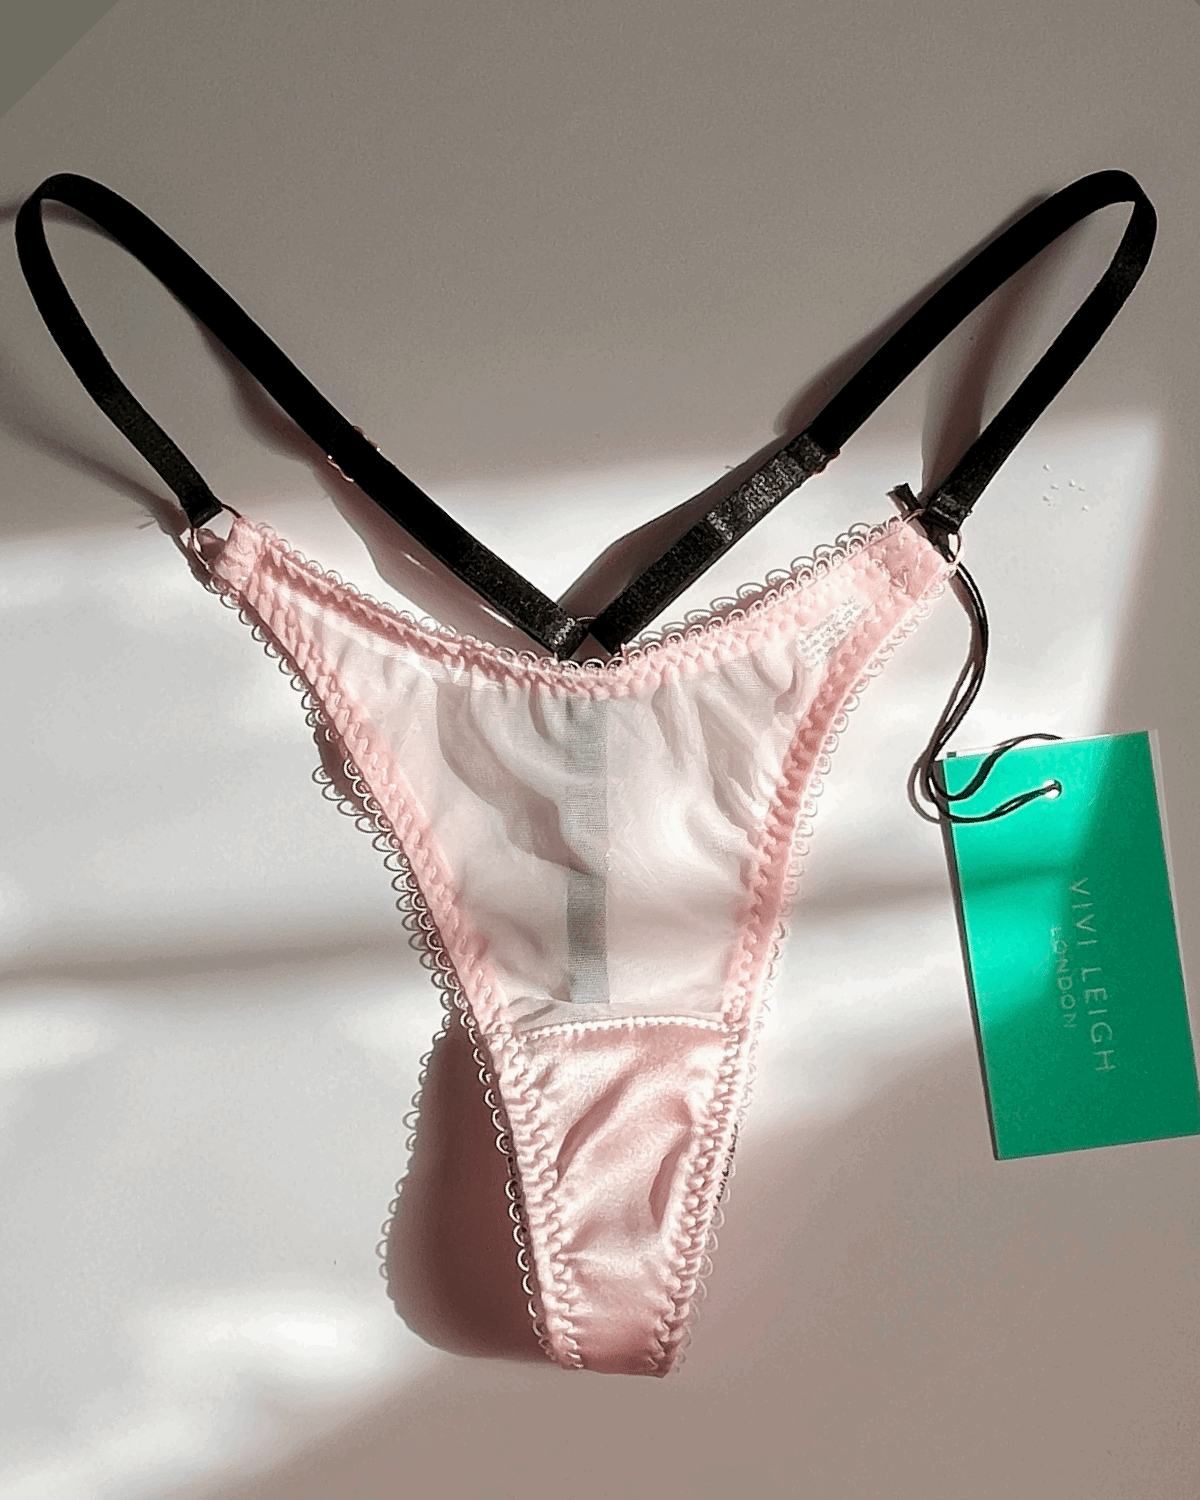 Vivi Leigh London lingerie Blush Pink Mesh Strappy Thong sexy harness luxury lingerie uk sustainable brand